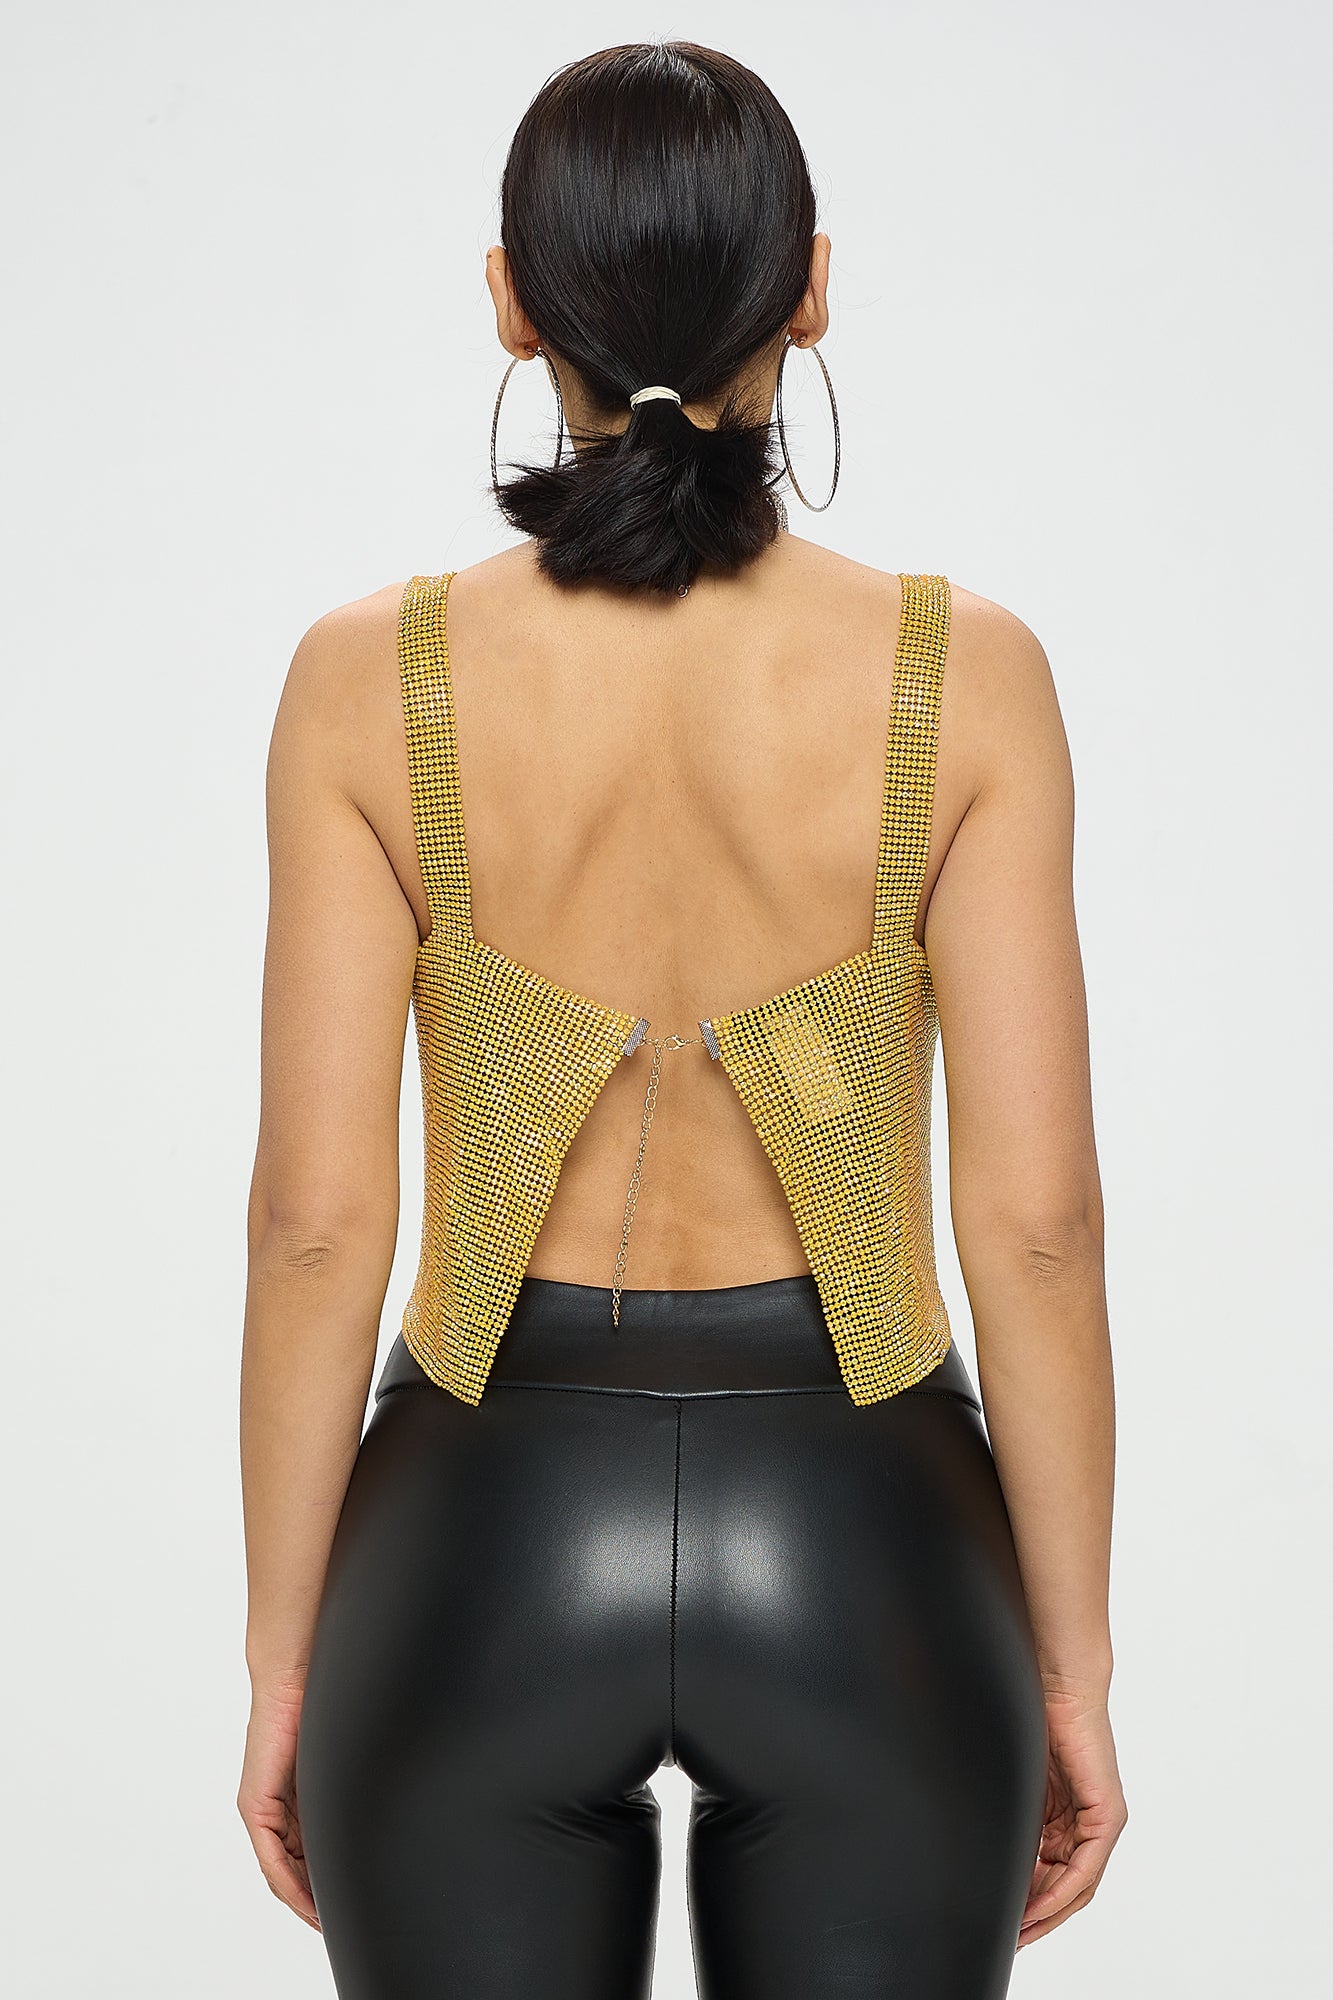 SOLID METALLIC CHAIN DETAIL BACKLESS CROP TOP